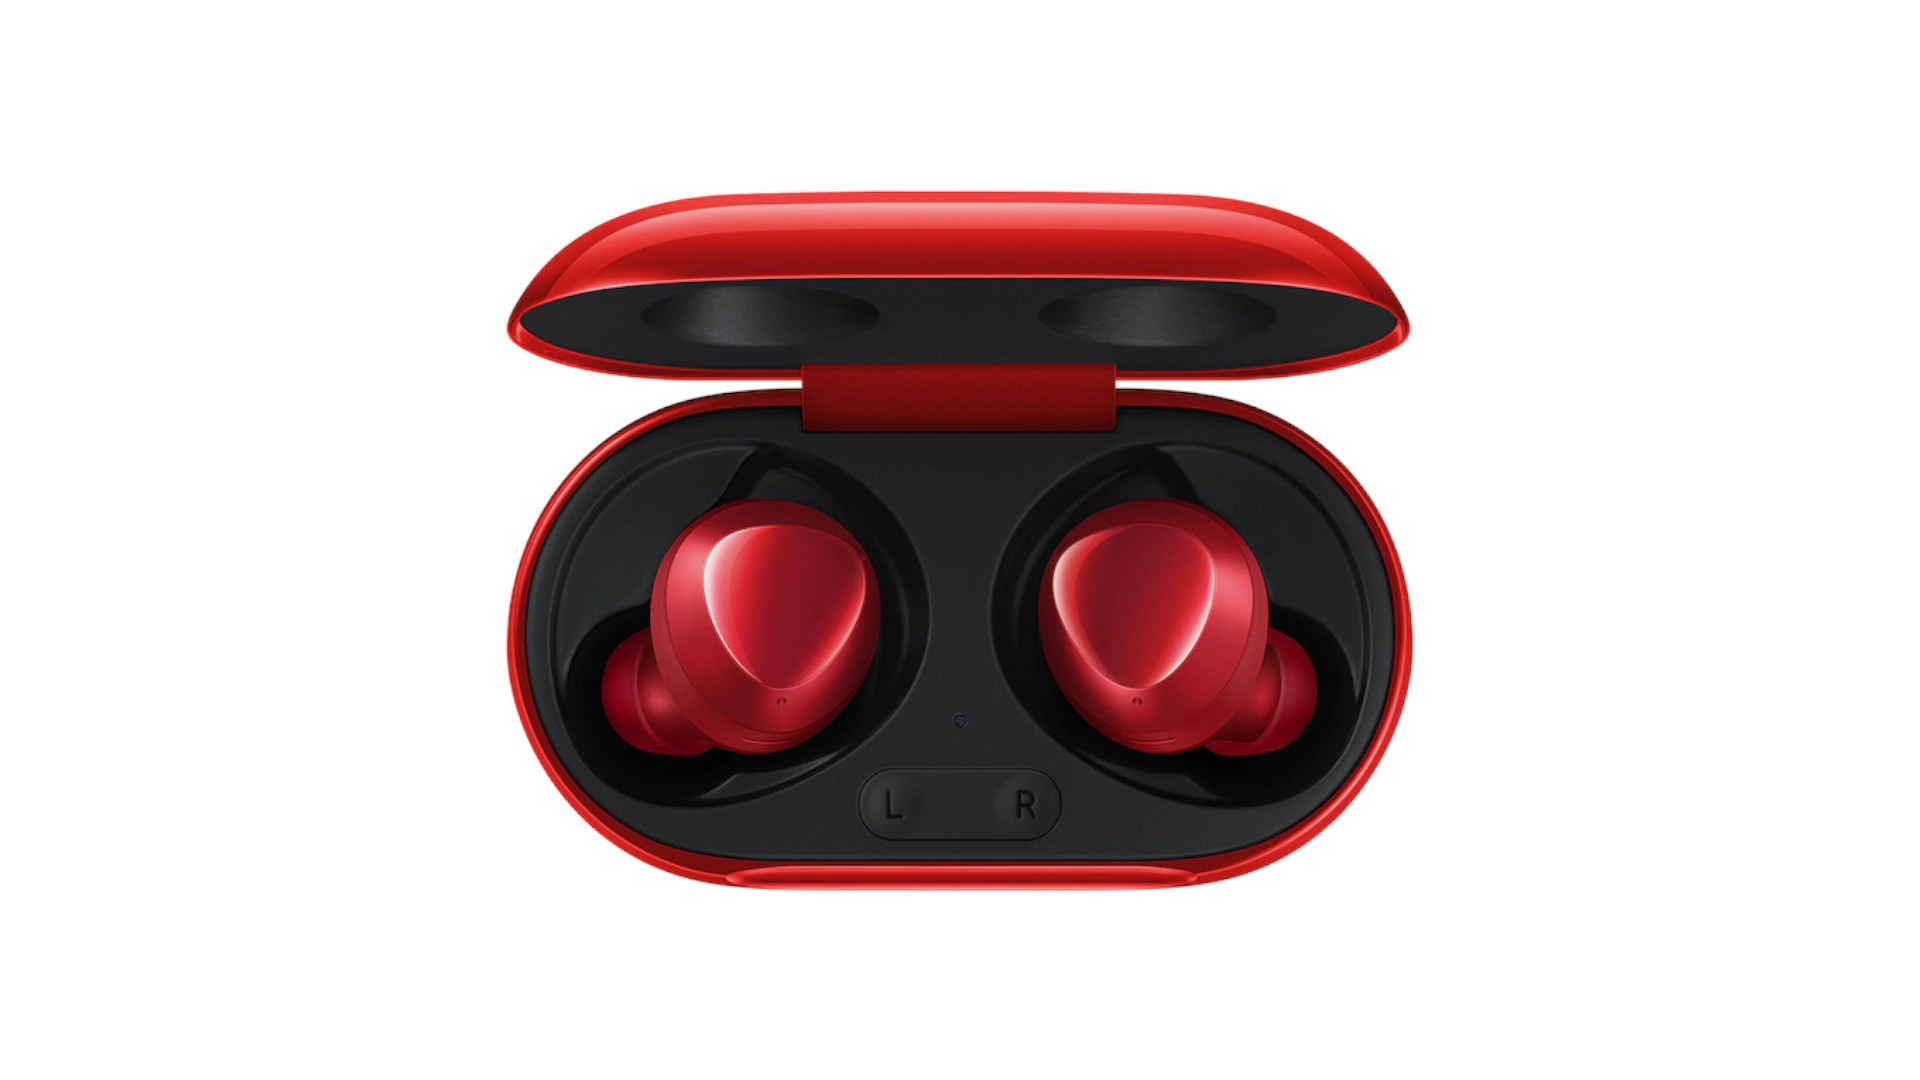 The Samsung Galaxy Buds Plus Red.